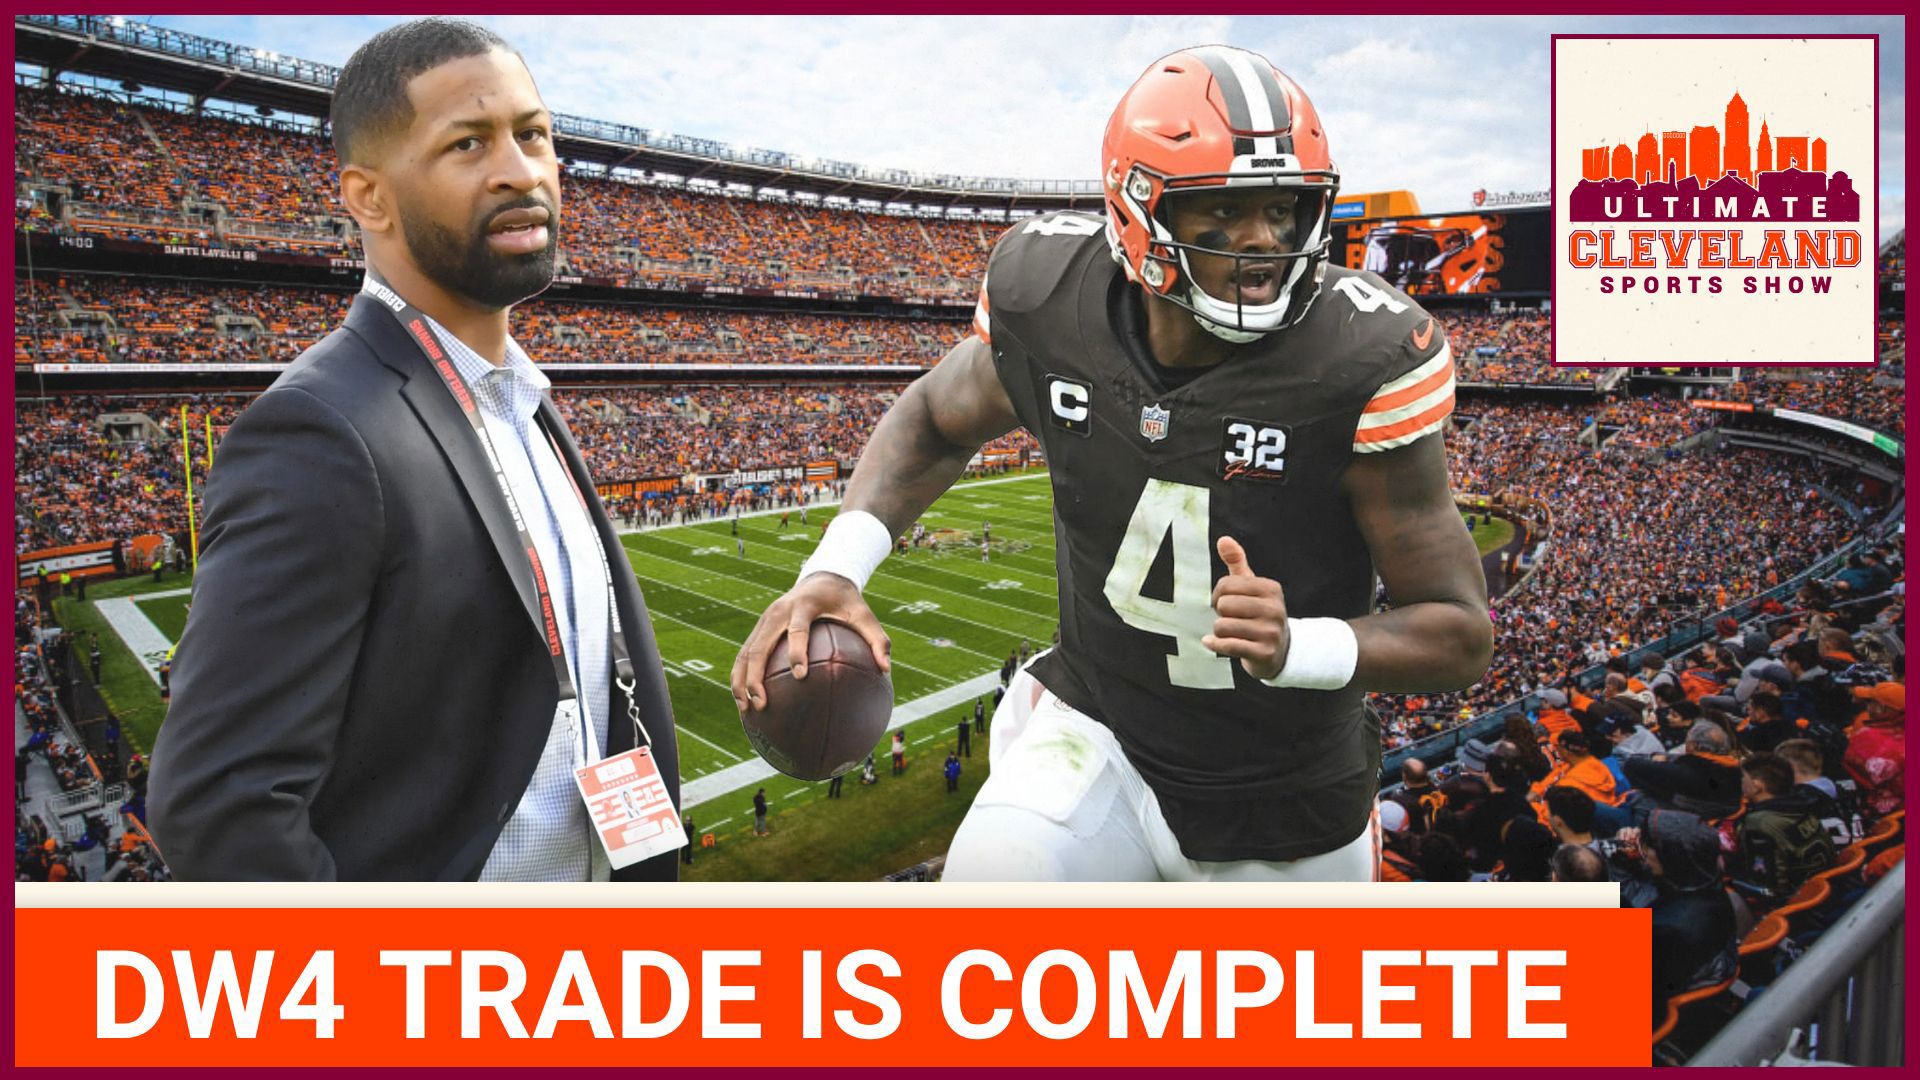 Do you feel better or worse about the Deshaun Watson trade after seeing who  HOU took w/ CLE's picks?